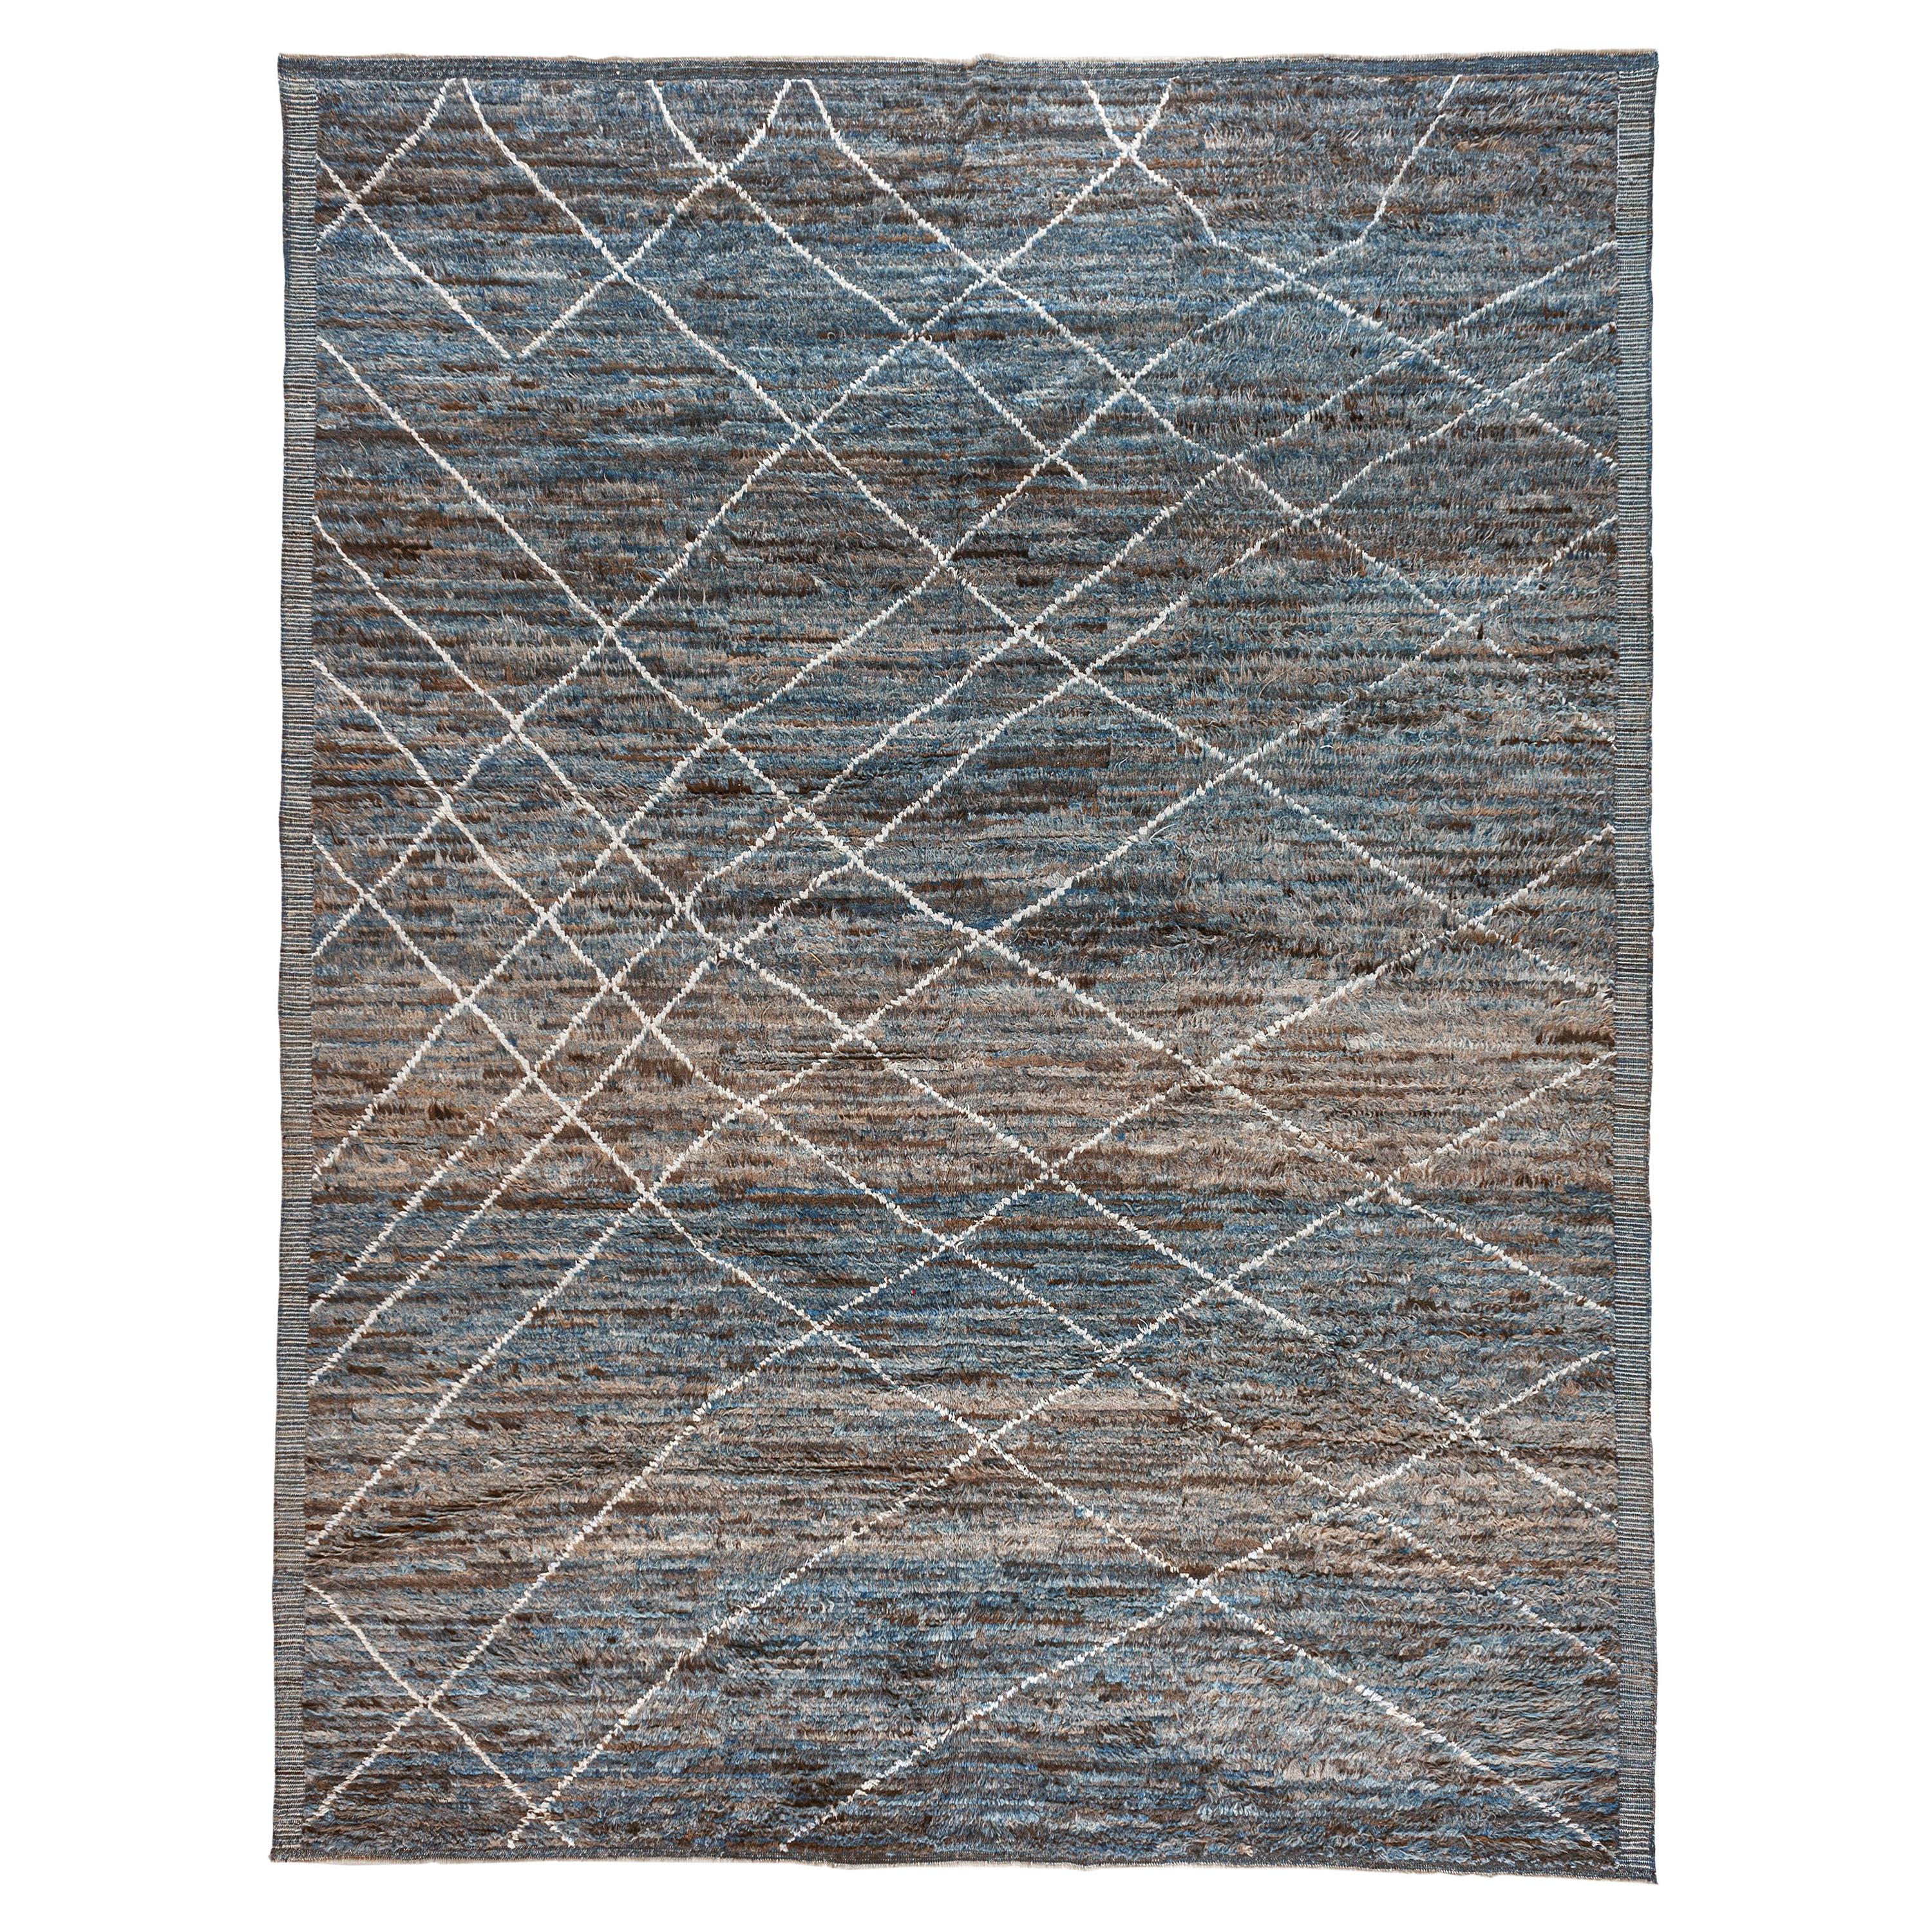 Shades of Blue Moroccan Inspired Rug For Sale